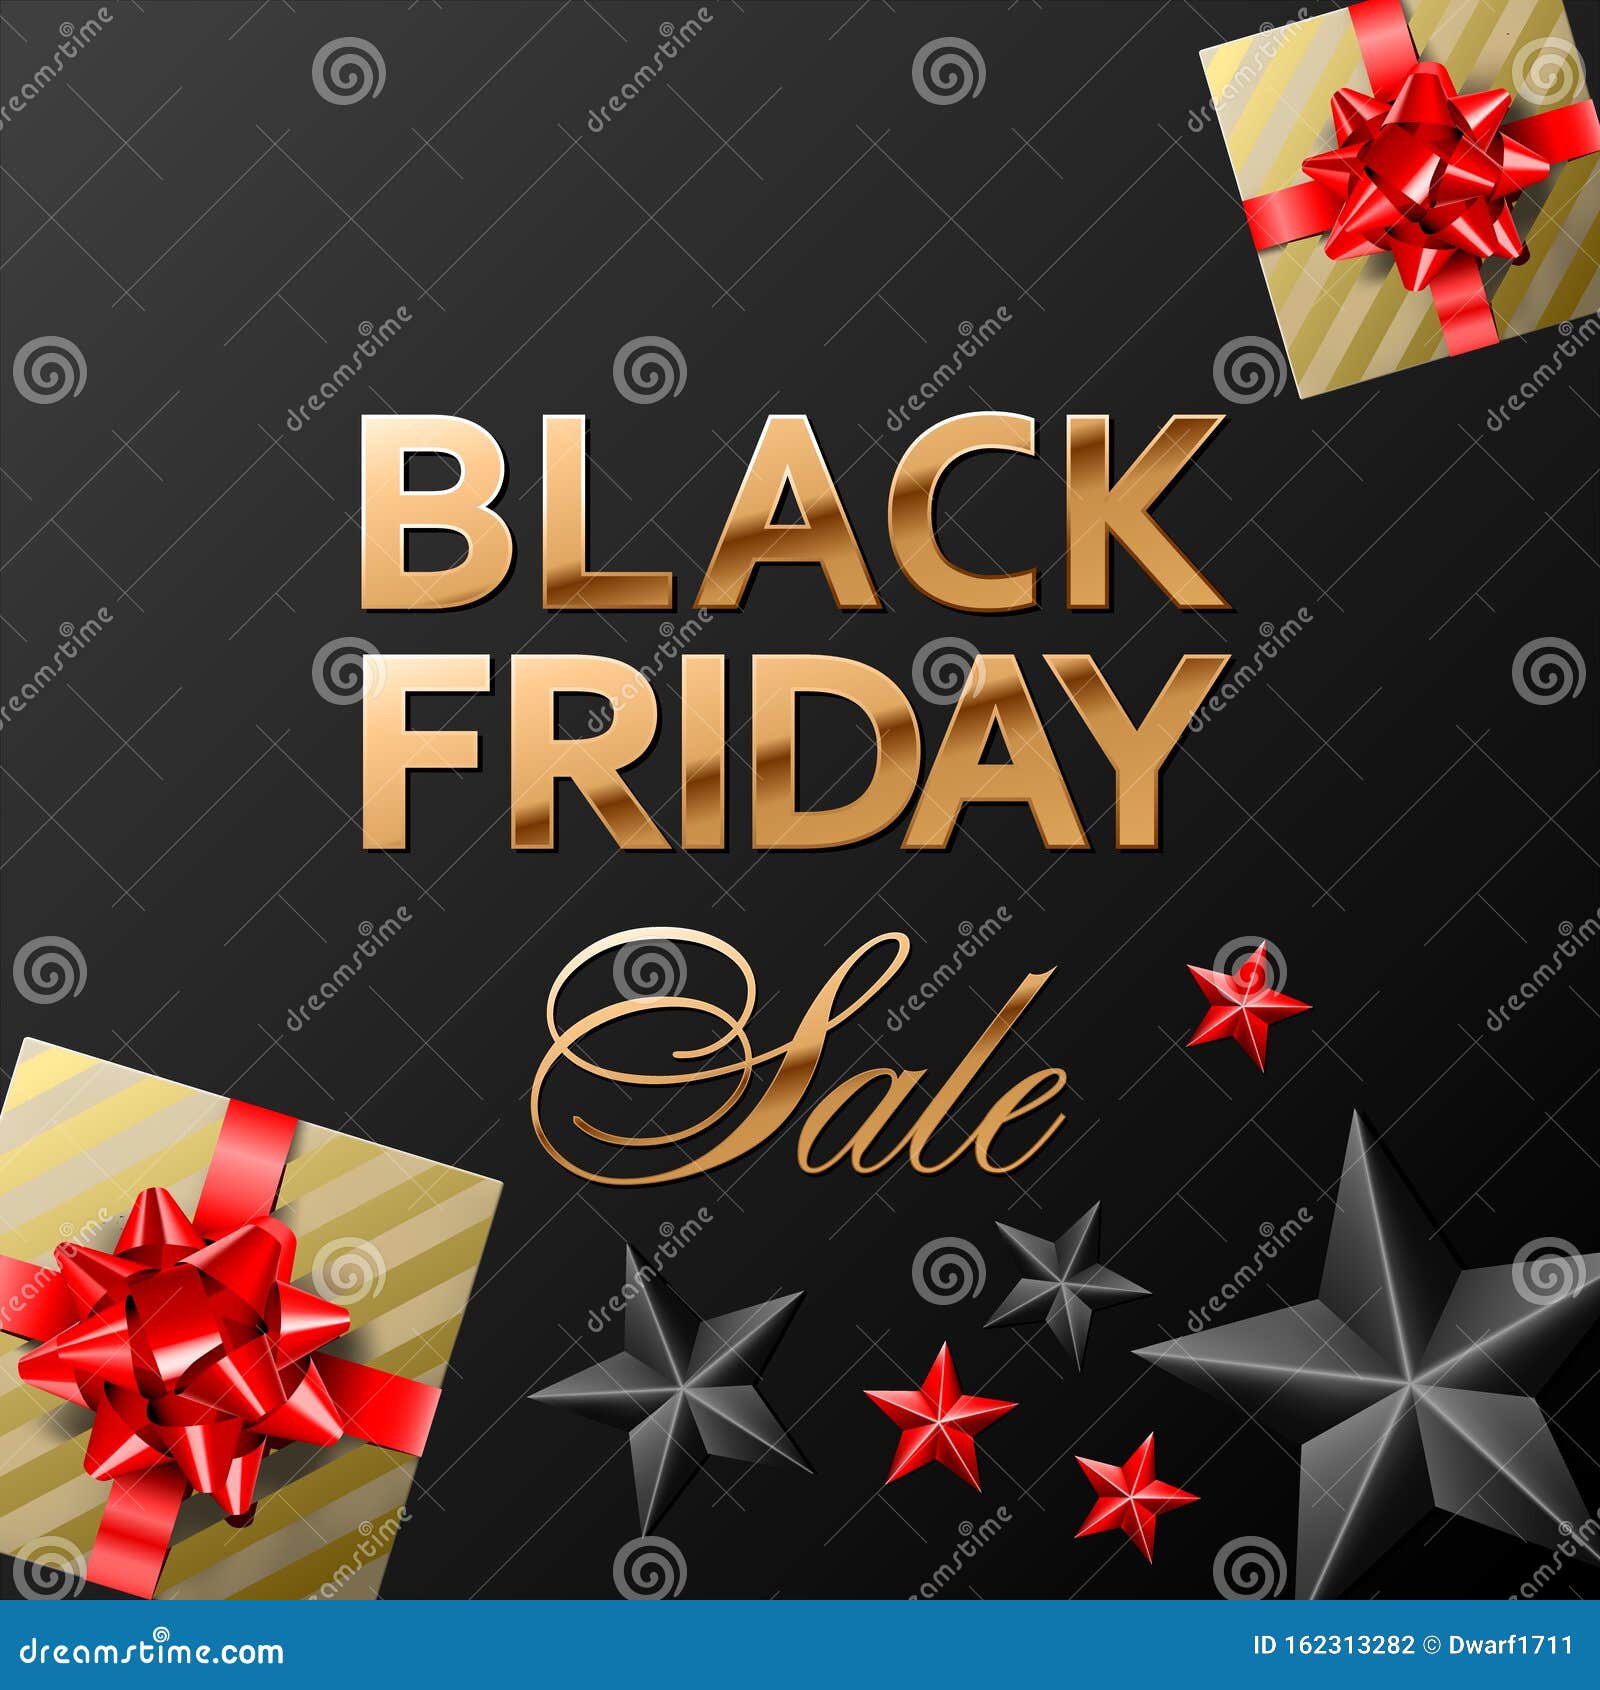 Black friday sale vector golden lettering on black background with red, black stars and gifts covered with gold and beige wrapping and golden bows. Square social media post or banner template.
